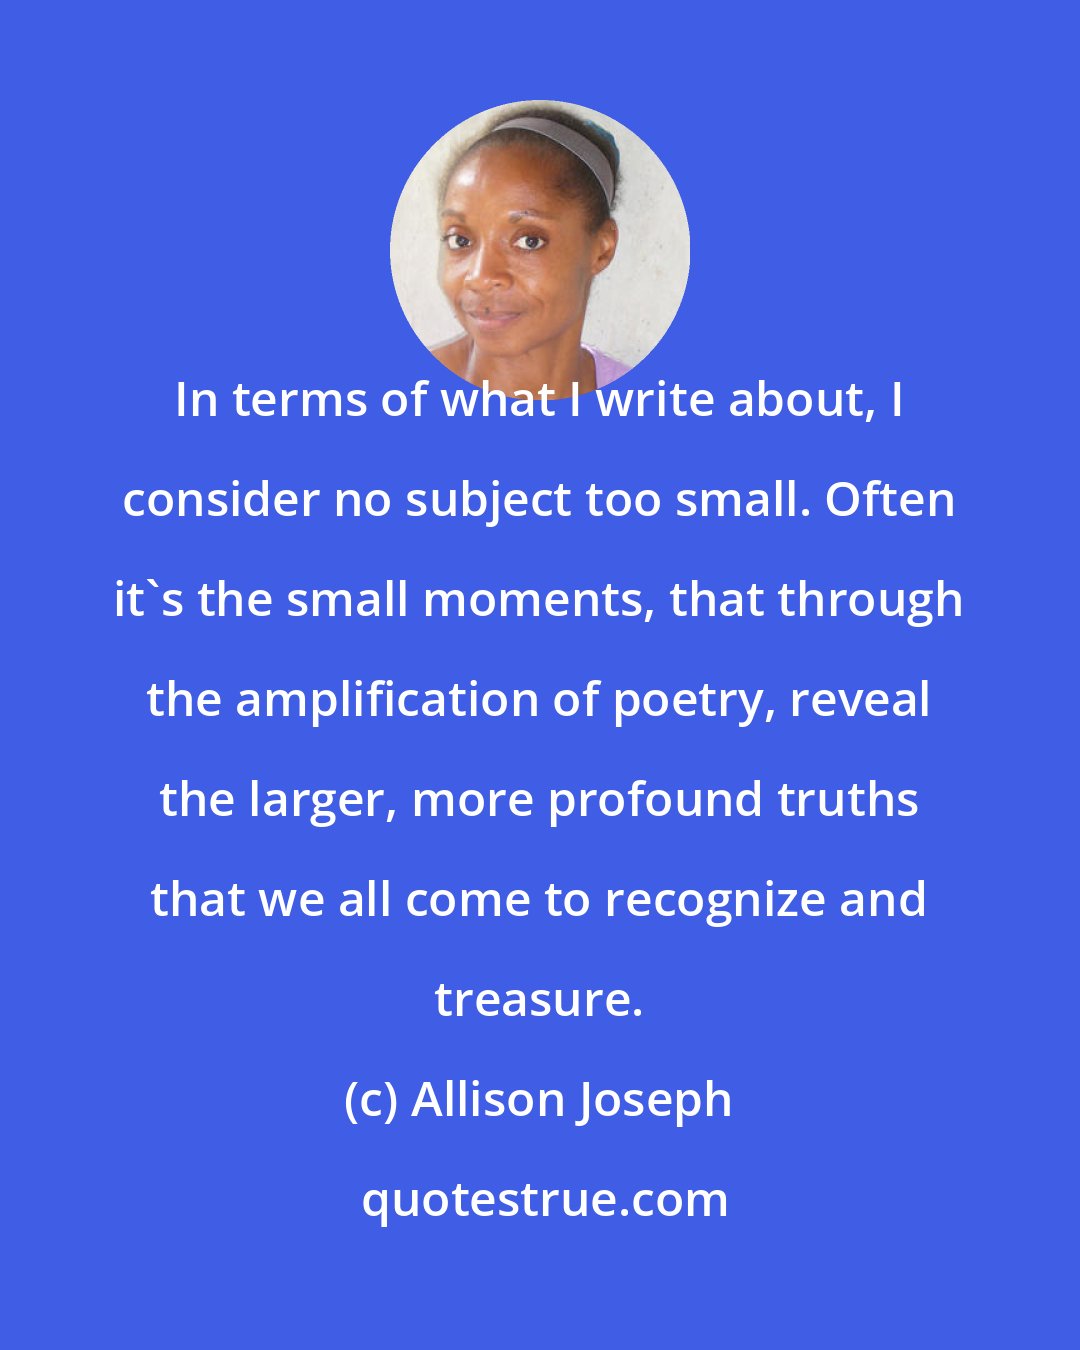 Allison Joseph: In terms of what I write about, I consider no subject too small. Often it's the small moments, that through the amplification of poetry, reveal the larger, more profound truths that we all come to recognize and treasure.